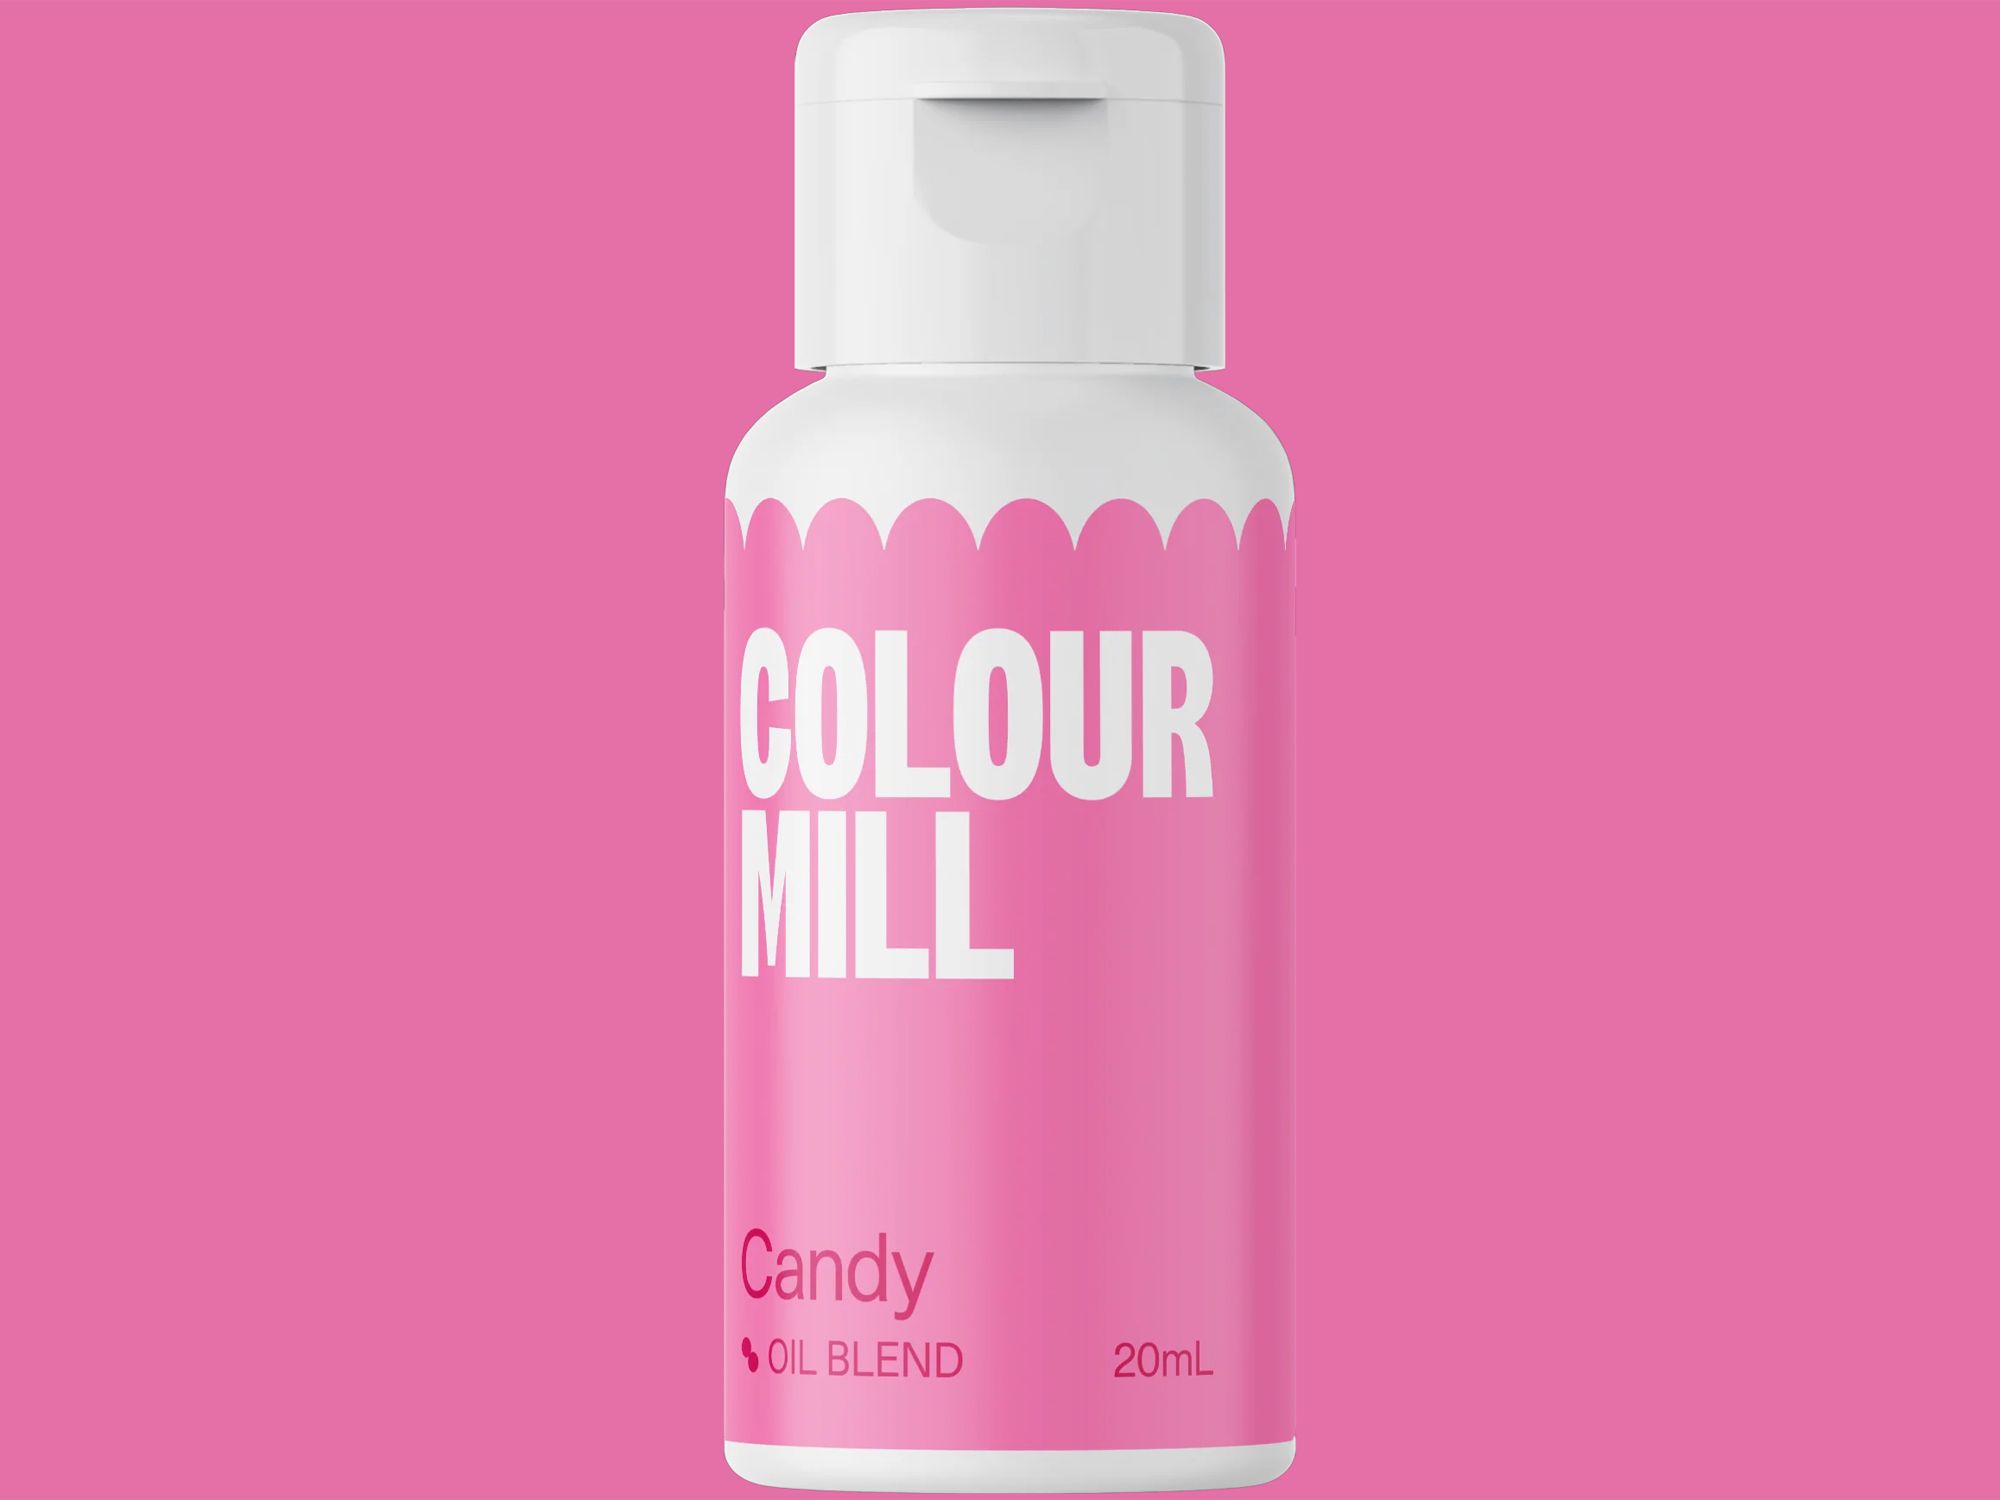 Colour Mill Candy (Oil Blend) 20ml